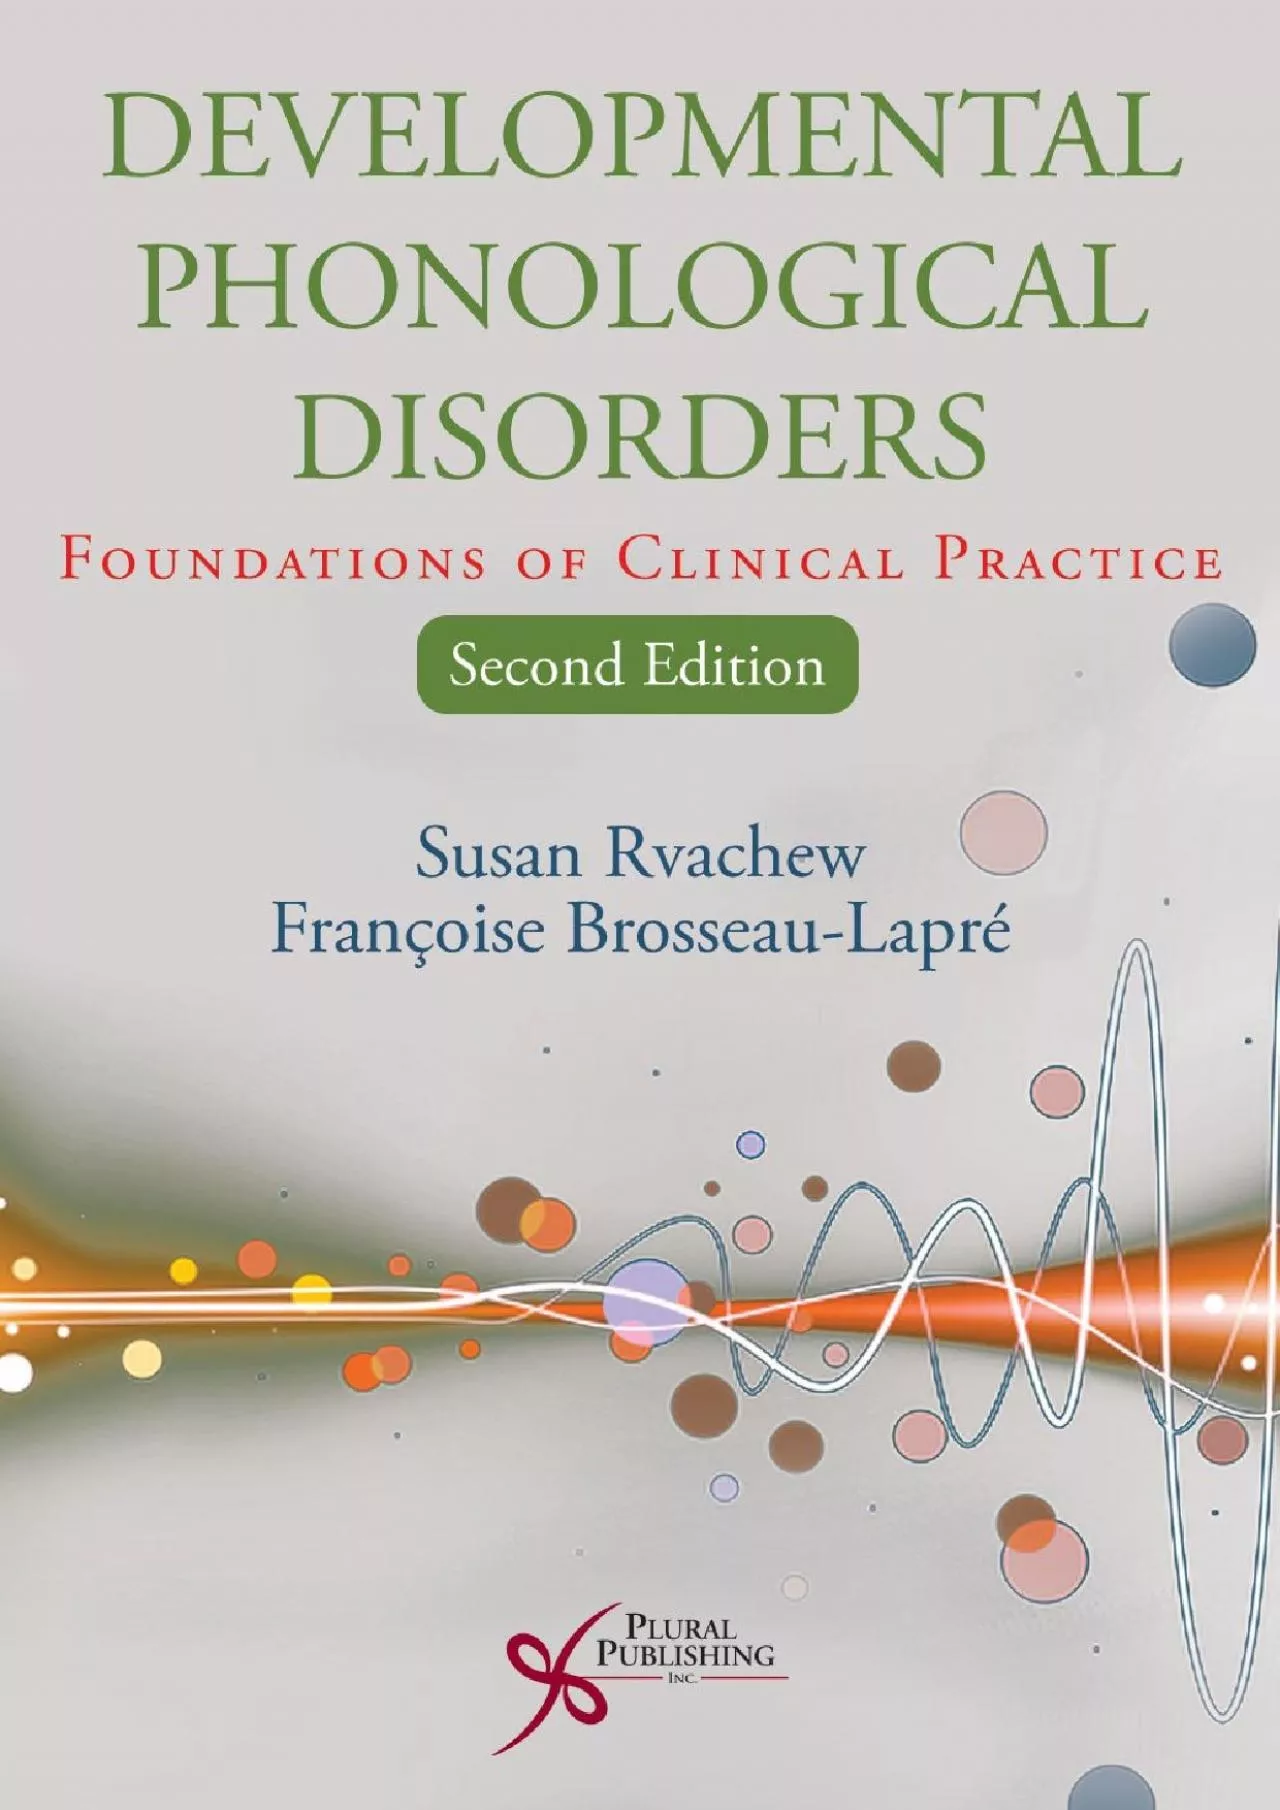 (EBOOK)-Developmental Phonological Disorders: Foundations of Clinical Practice, Second